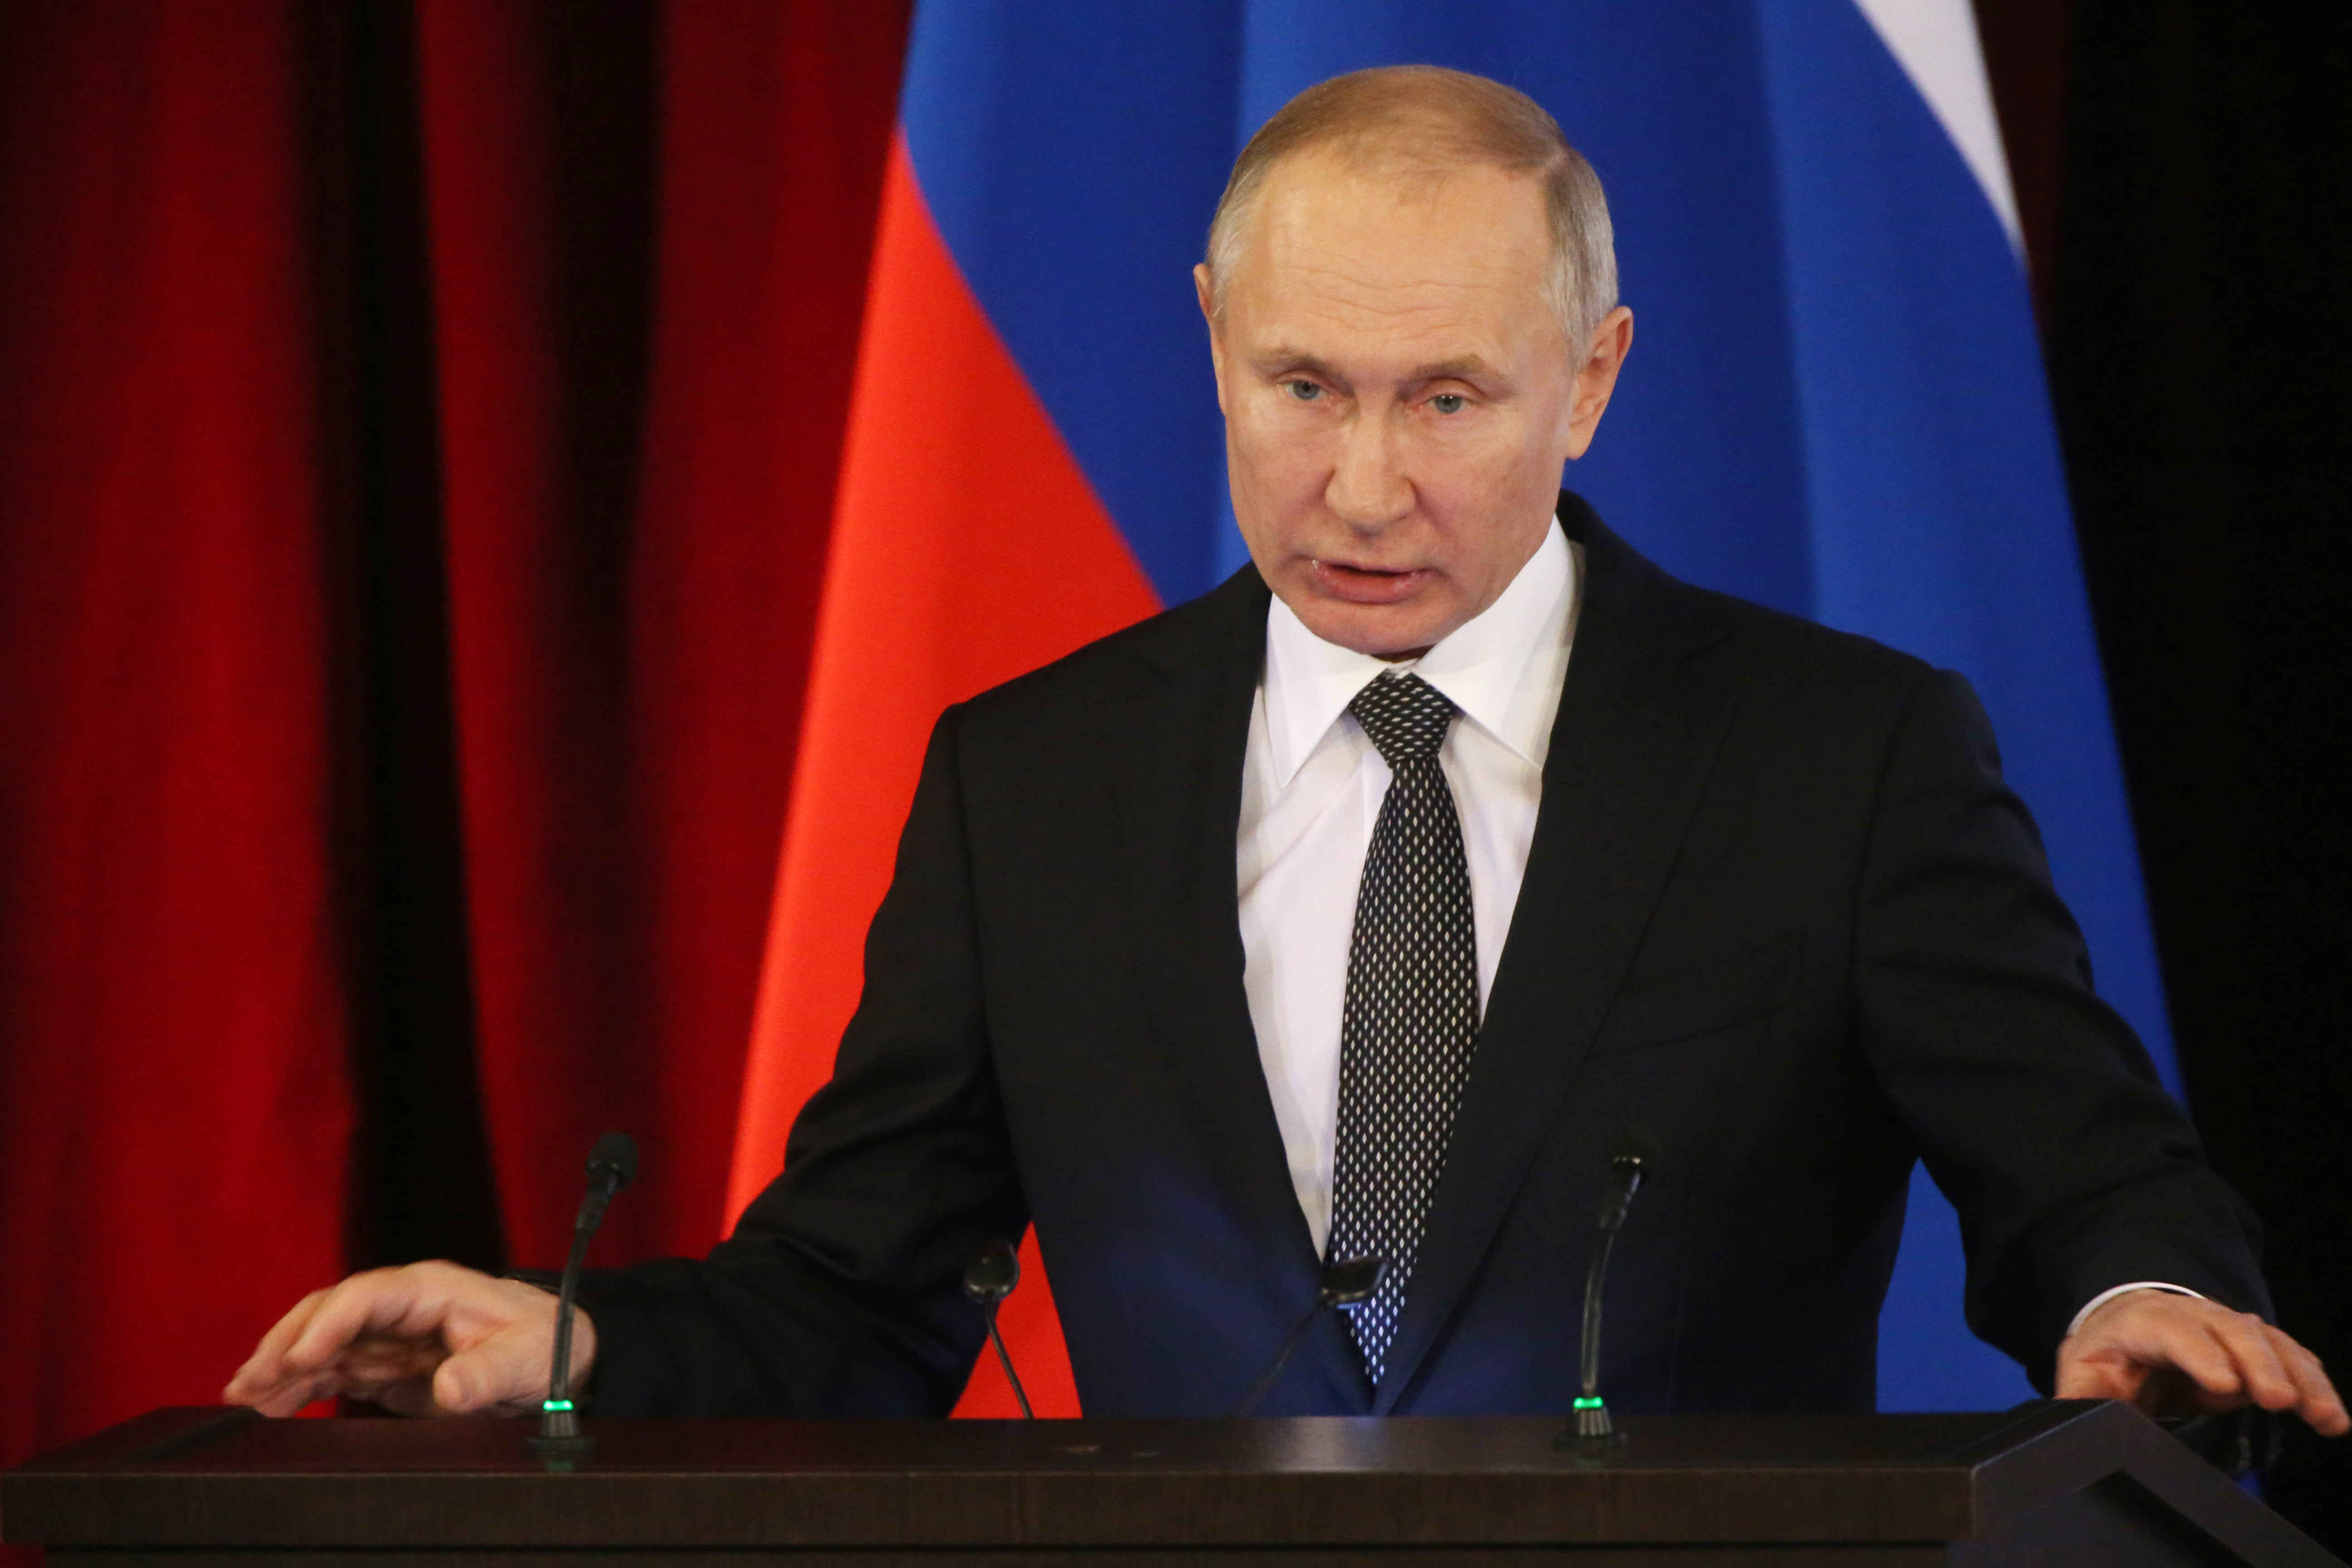 Putin warns against crossing Russia’s ‘red lines’, and speaks militarily